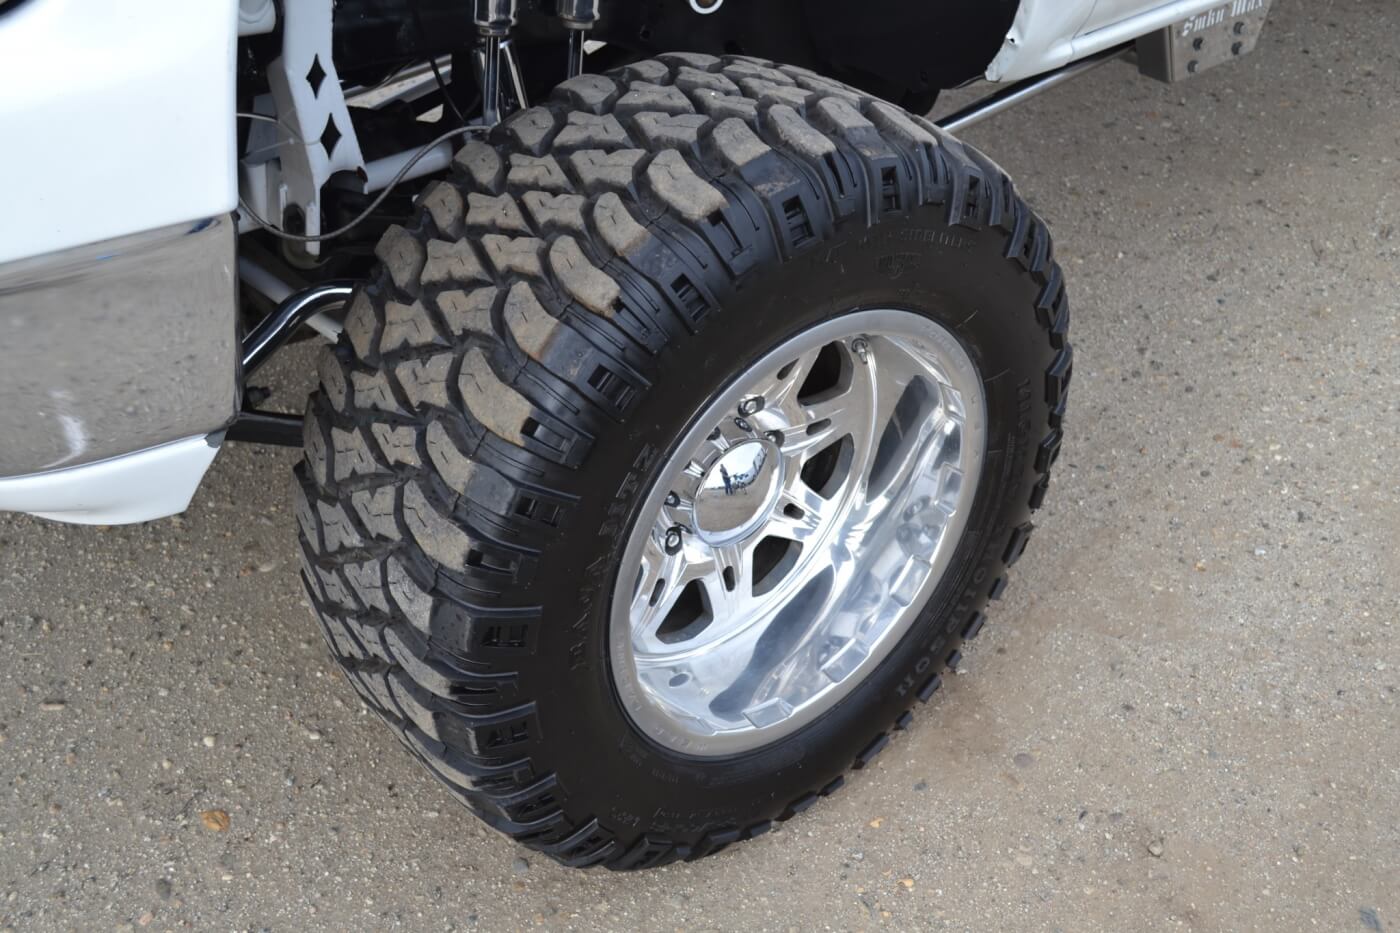 Aggressive tires are usually best on loose West Coast tracks, so 325/60R18 Mickey Thompson Baja MTZ's were mounted on 18x12-inch Weld Racing wheels to provide grip. 